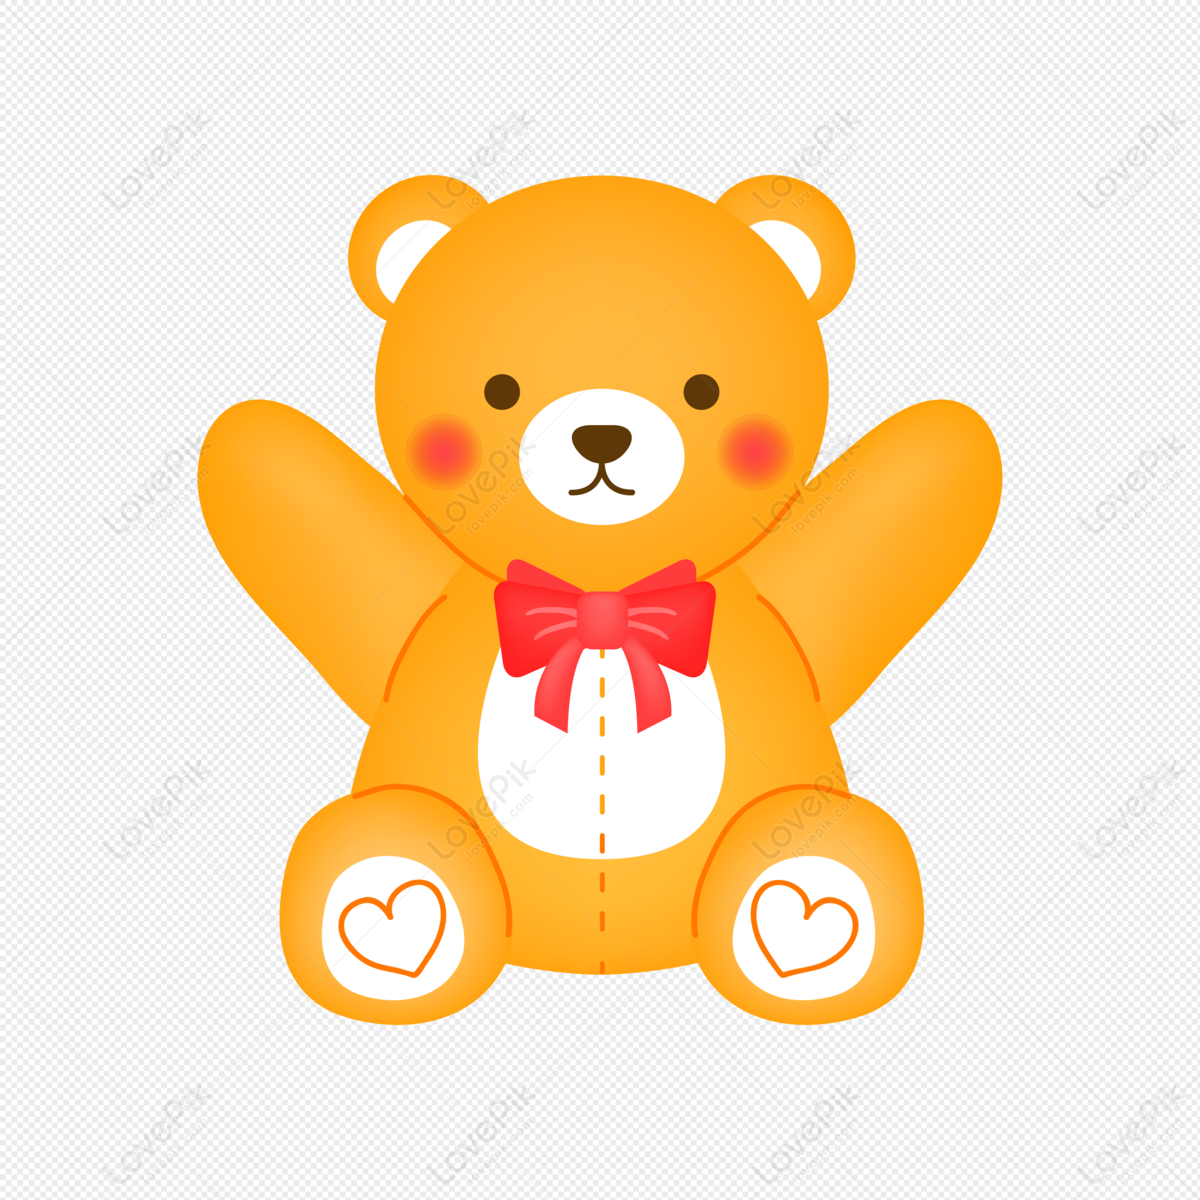 Cute Yellow Teddy Bear PNG Hd Transparent Image And Clipart Image For Free  Download - Lovepik | 401240434